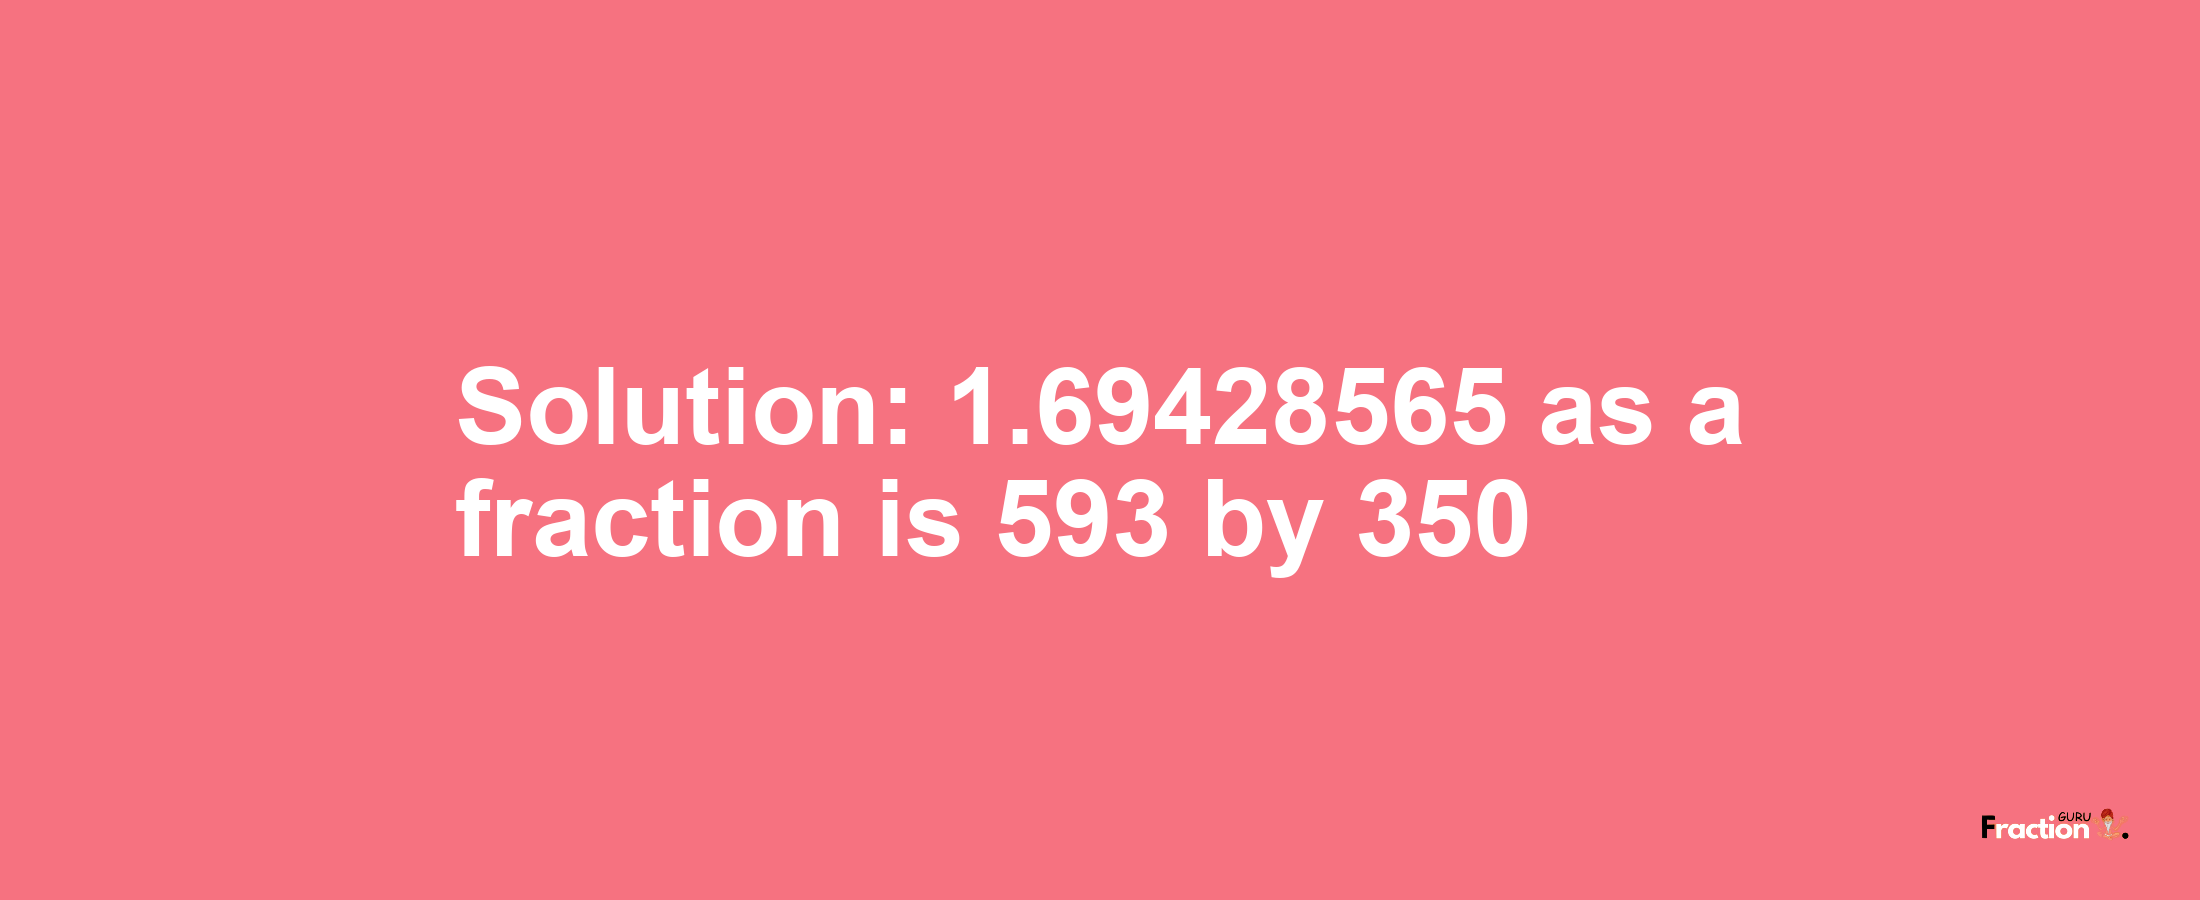 Solution:1.69428565 as a fraction is 593/350